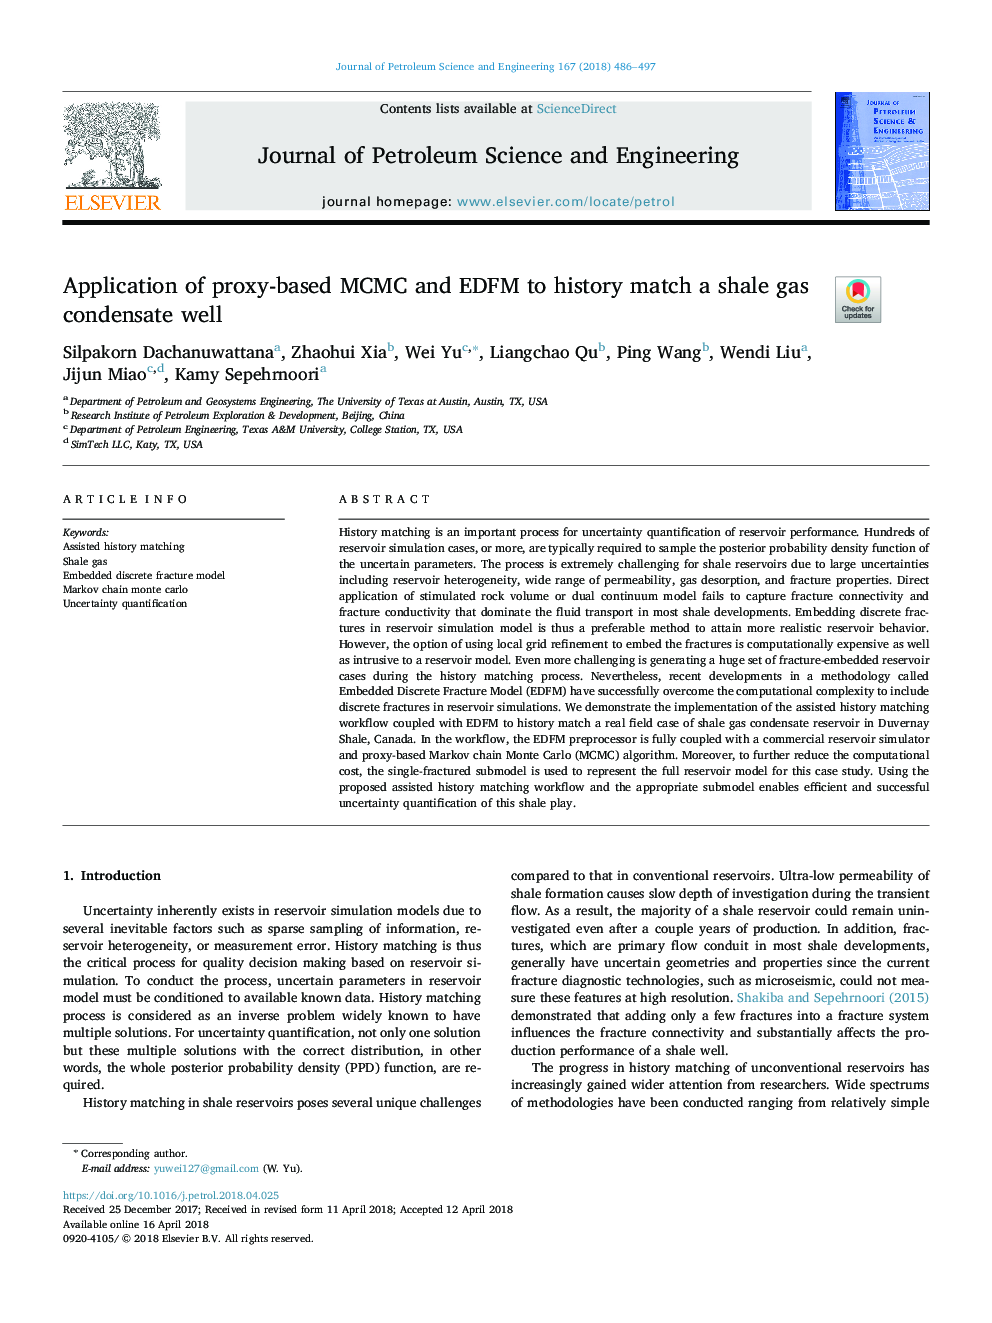 Application of proxy-based MCMC and EDFM to history match a shale gas condensate well